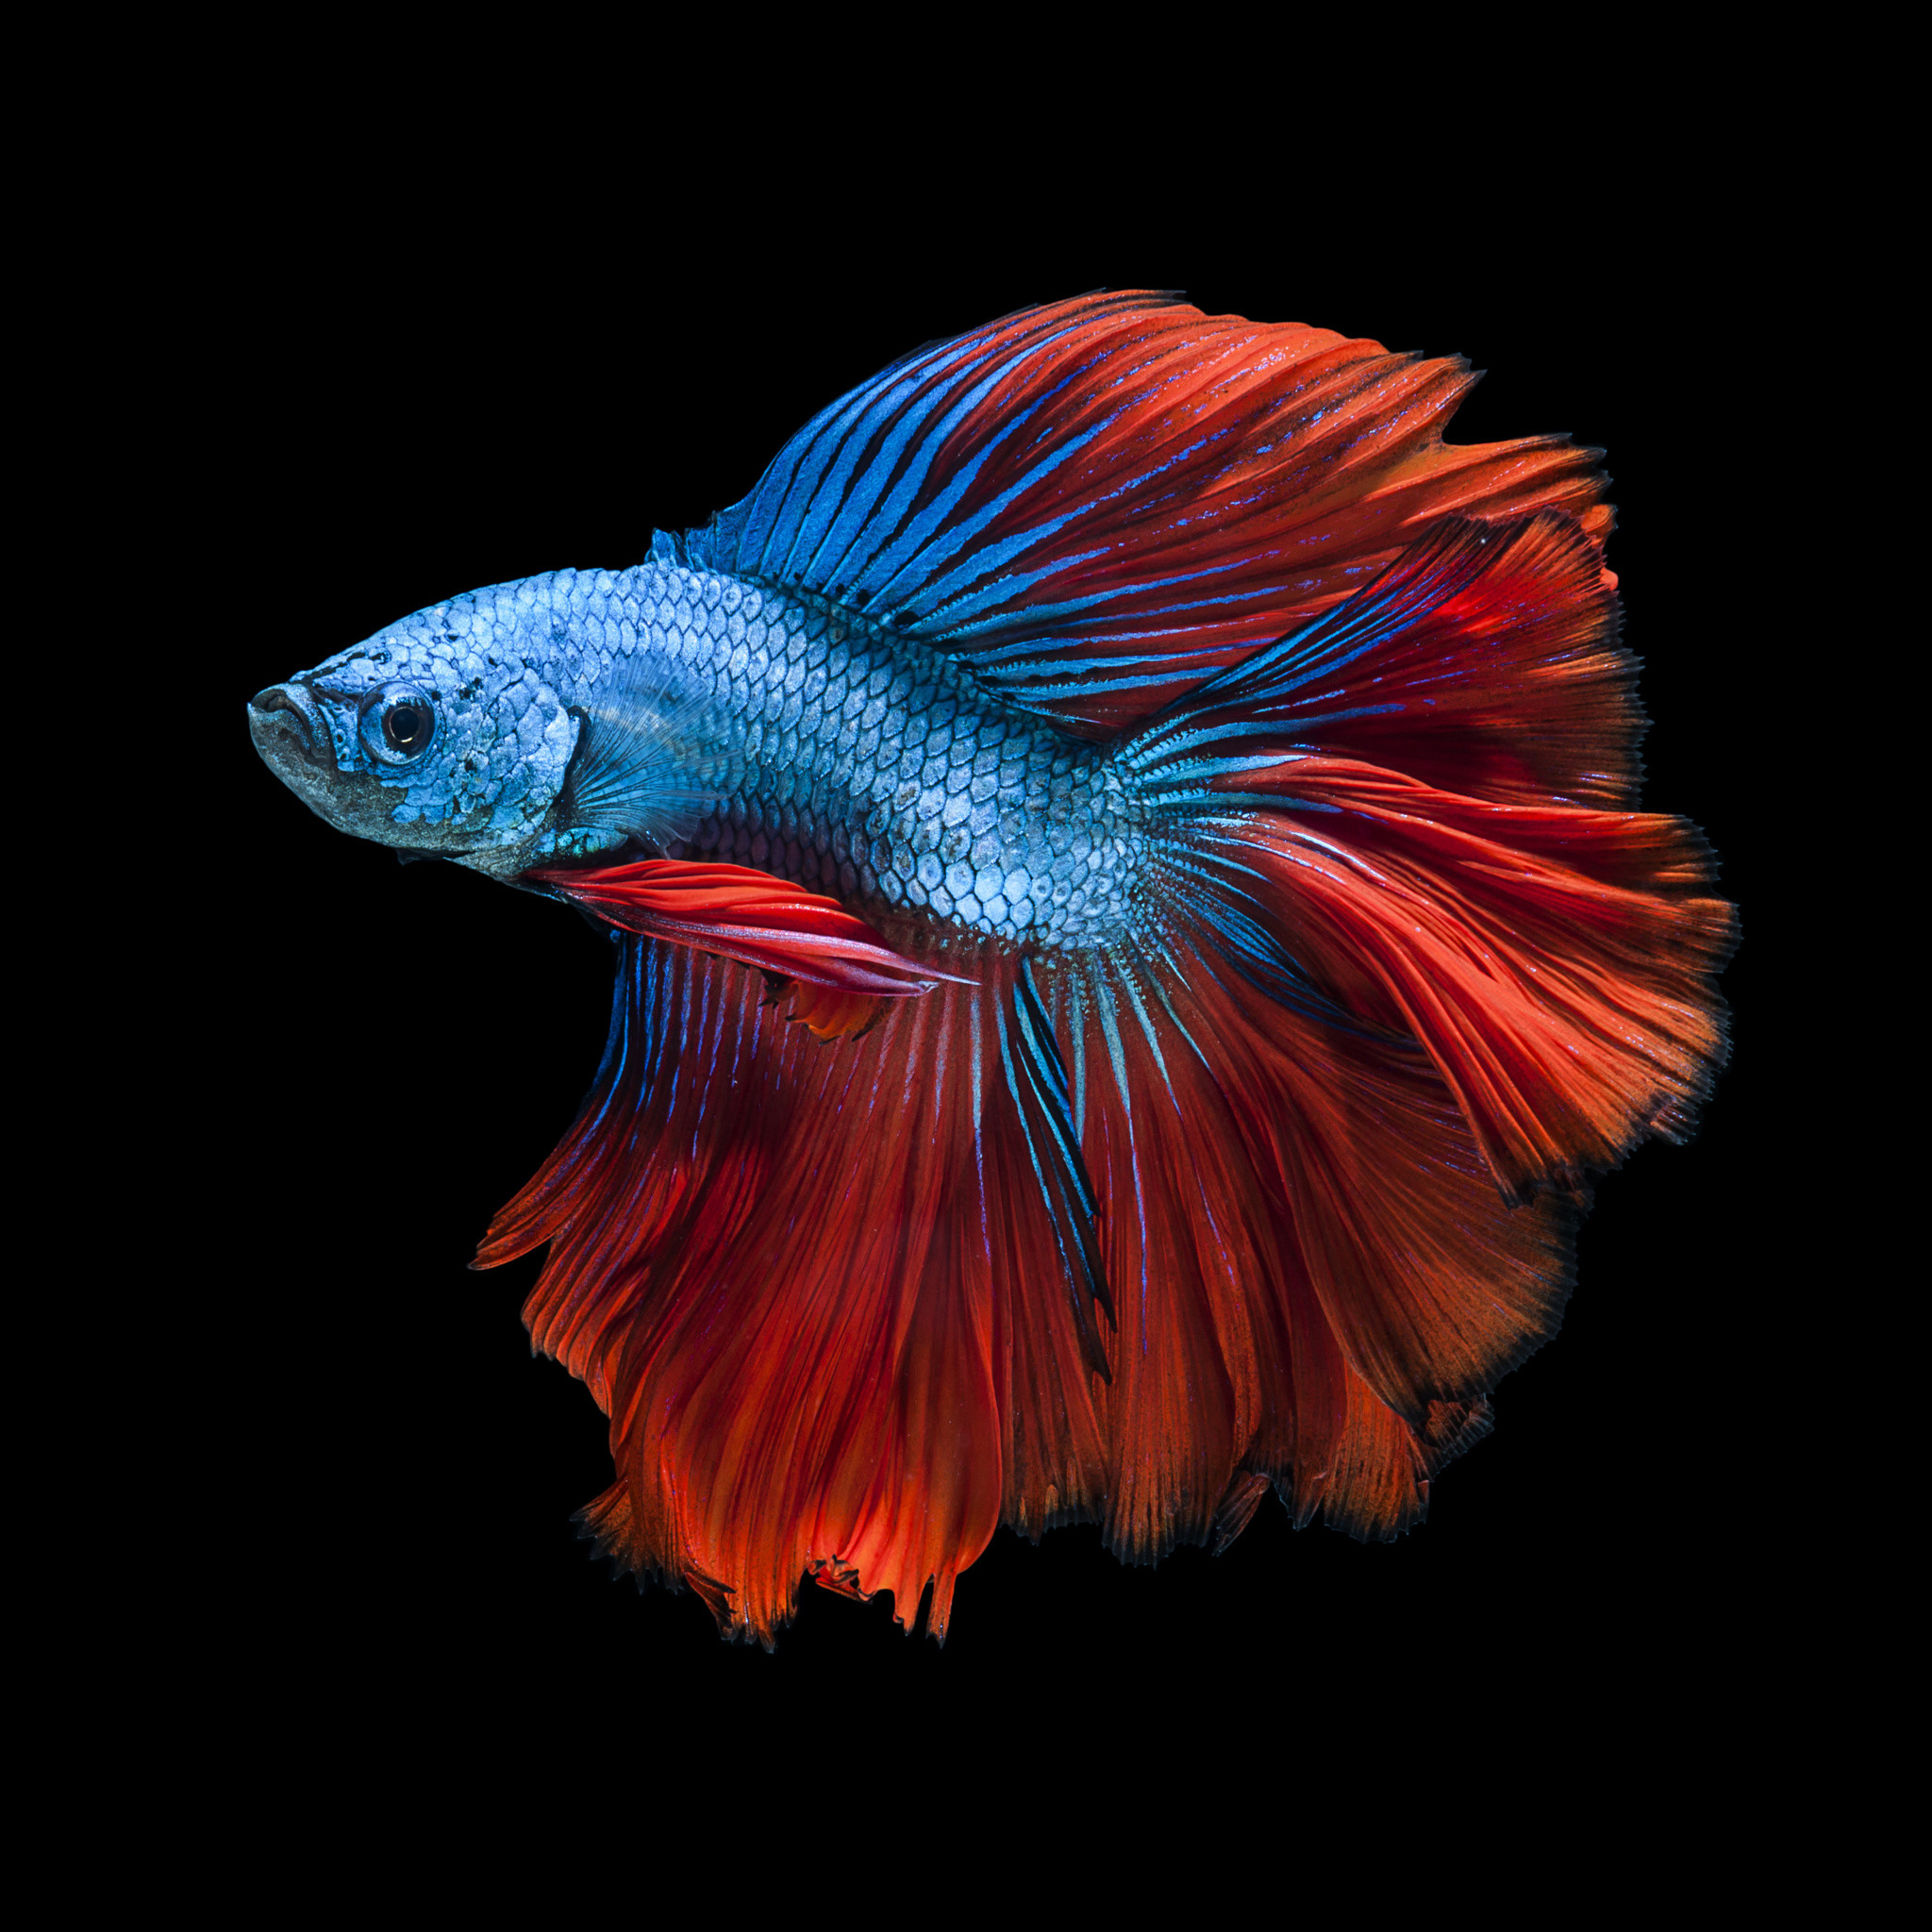 2048x2048 Apple iPhone Wallpaper with Red and Blue Betta Fish and Dark Background in